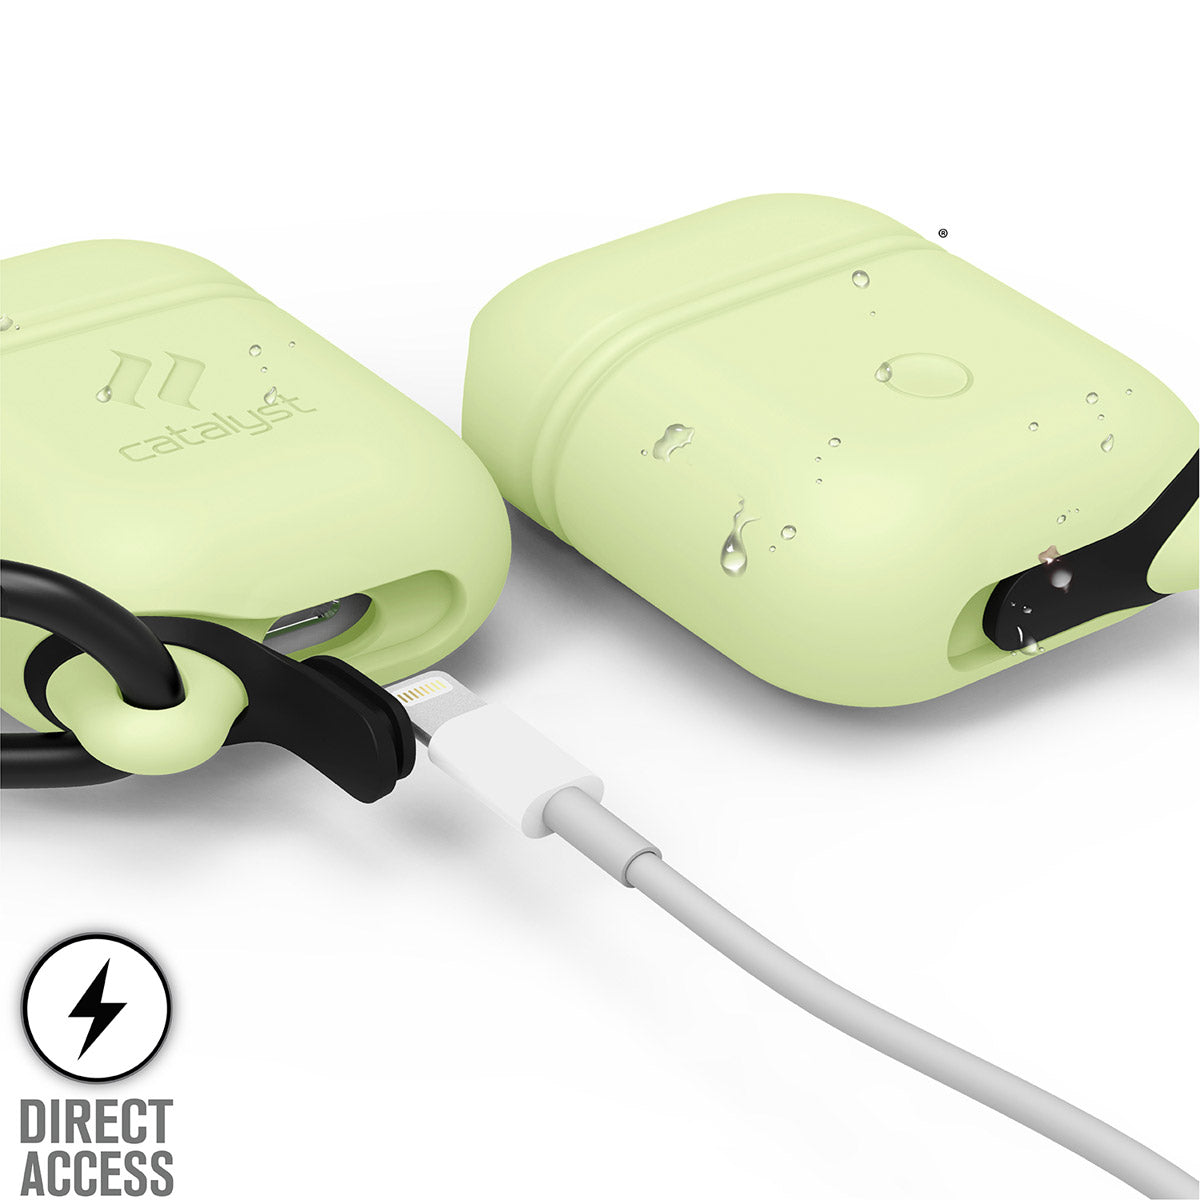 Catalyst airpods gen2/1 waterproof case + carabiner showing the front and back with lightning port in glow in the dark text reads direct access